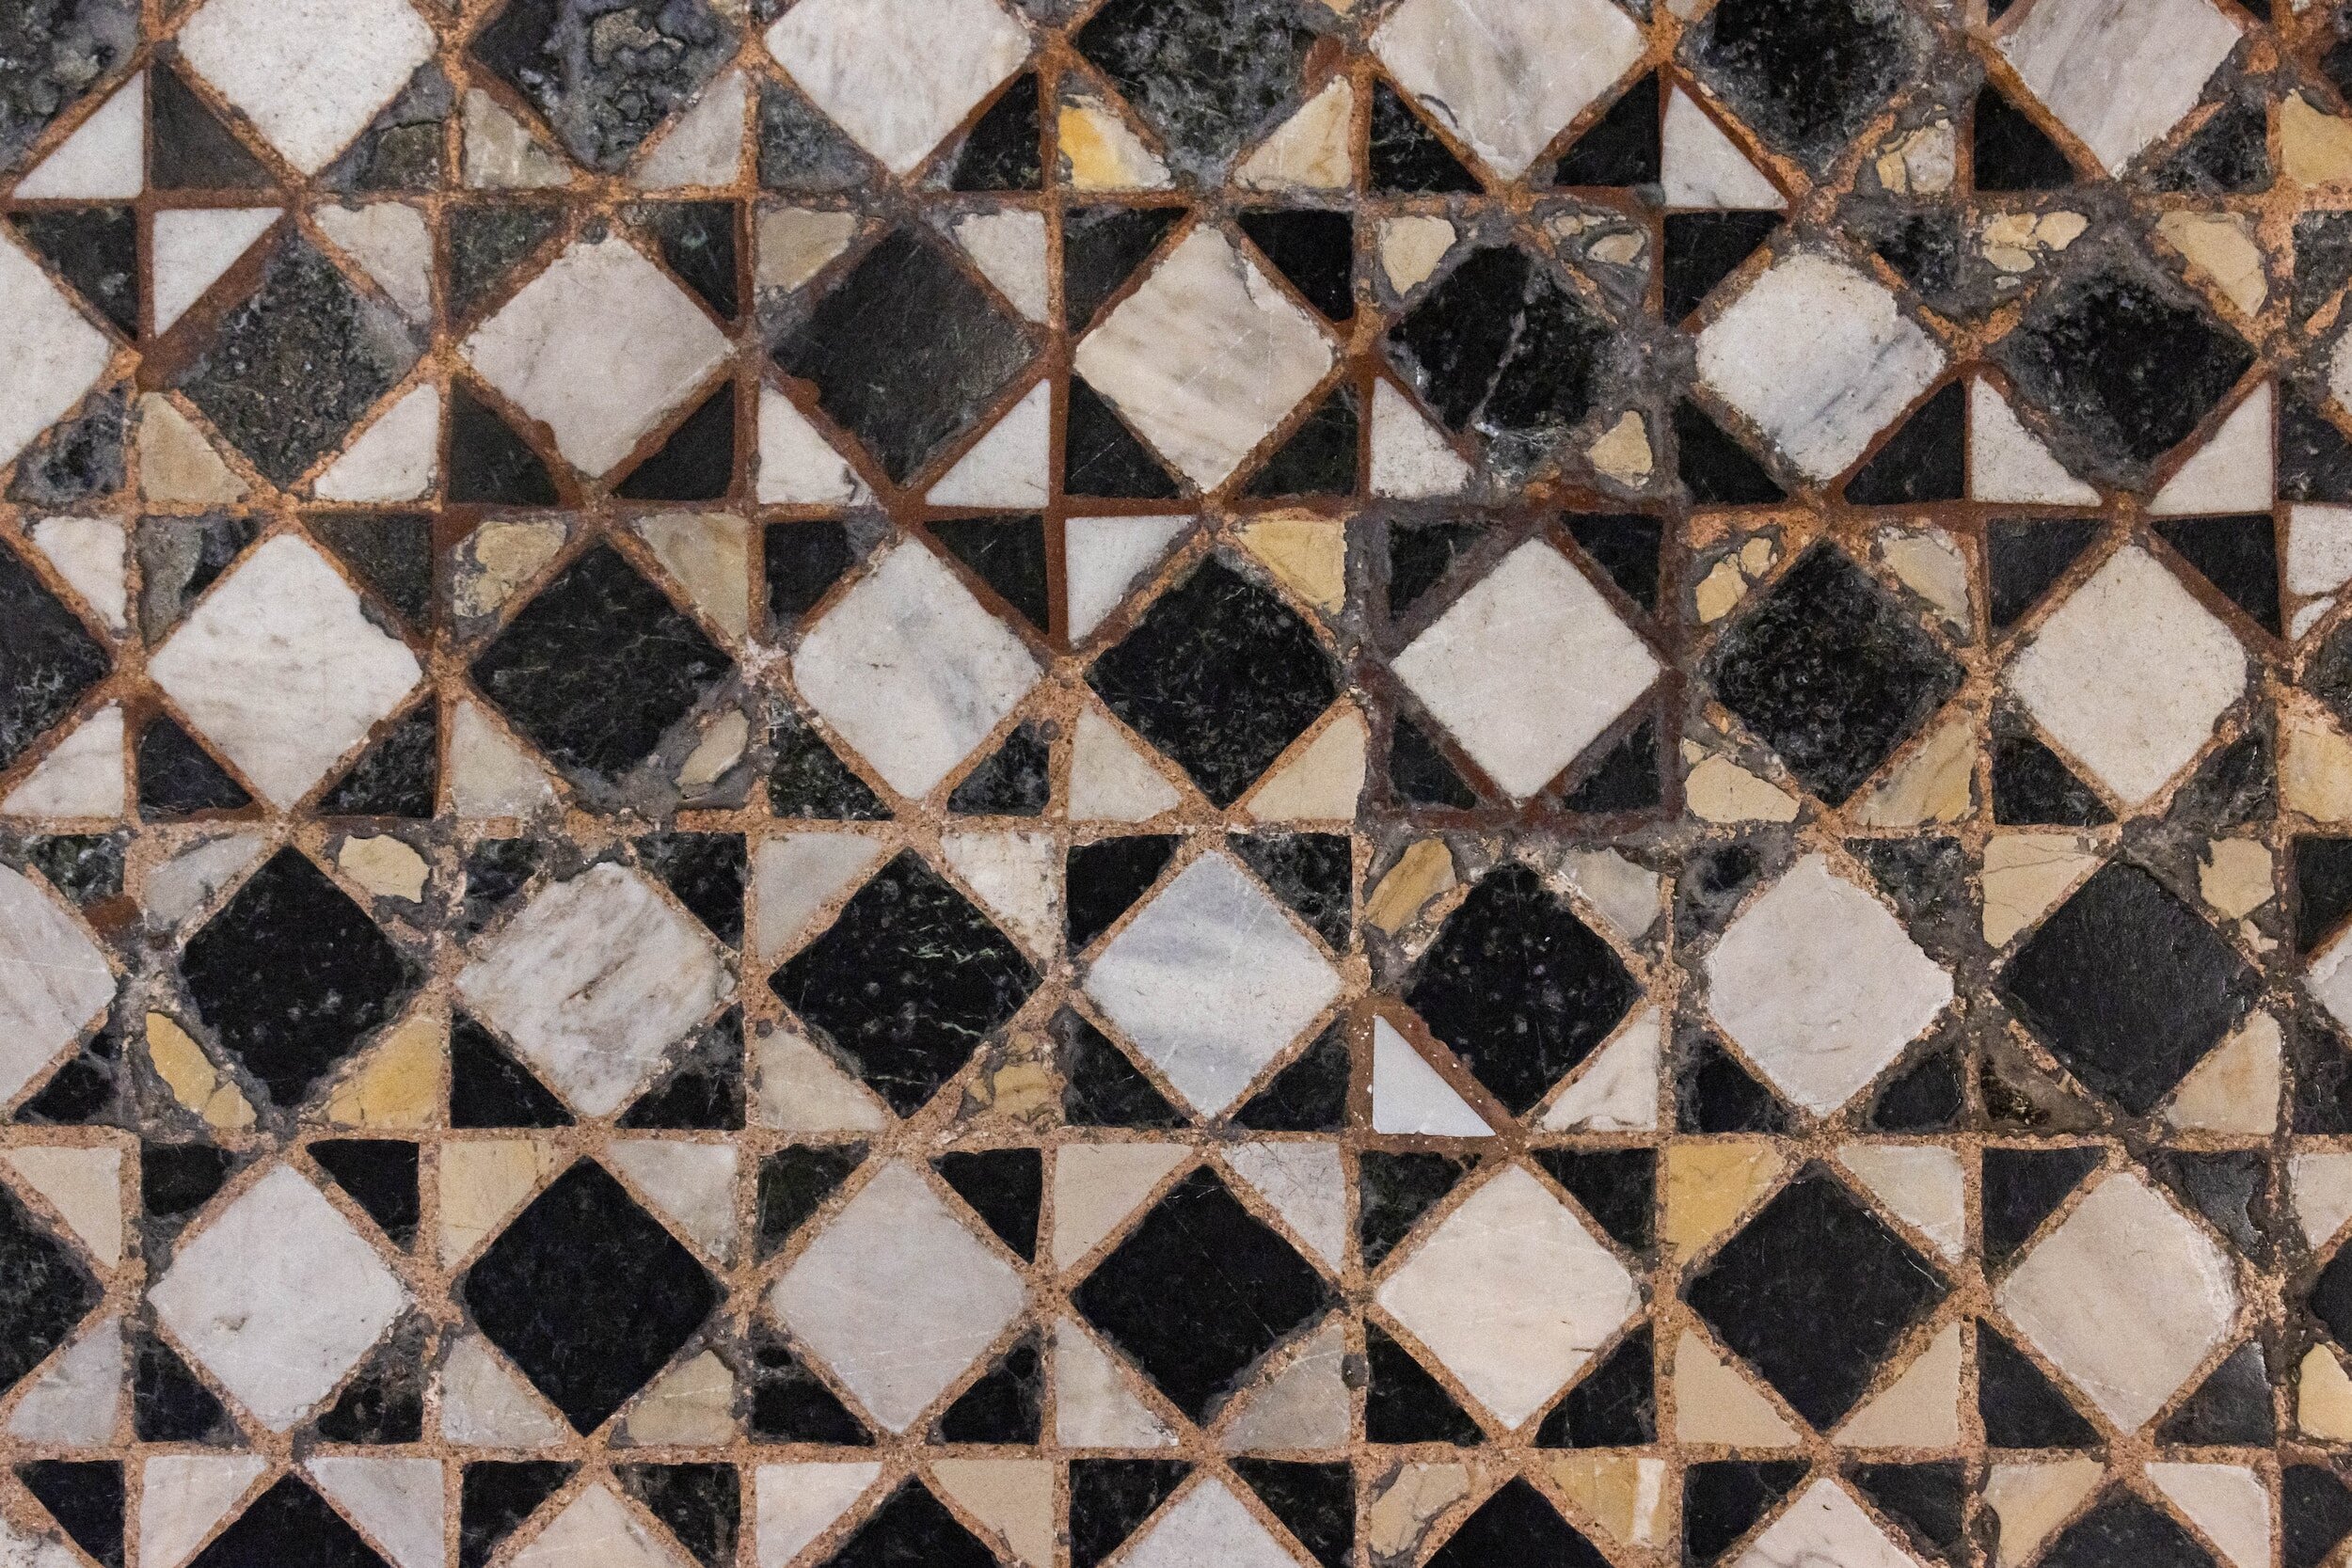 Example of intricate tile flooring